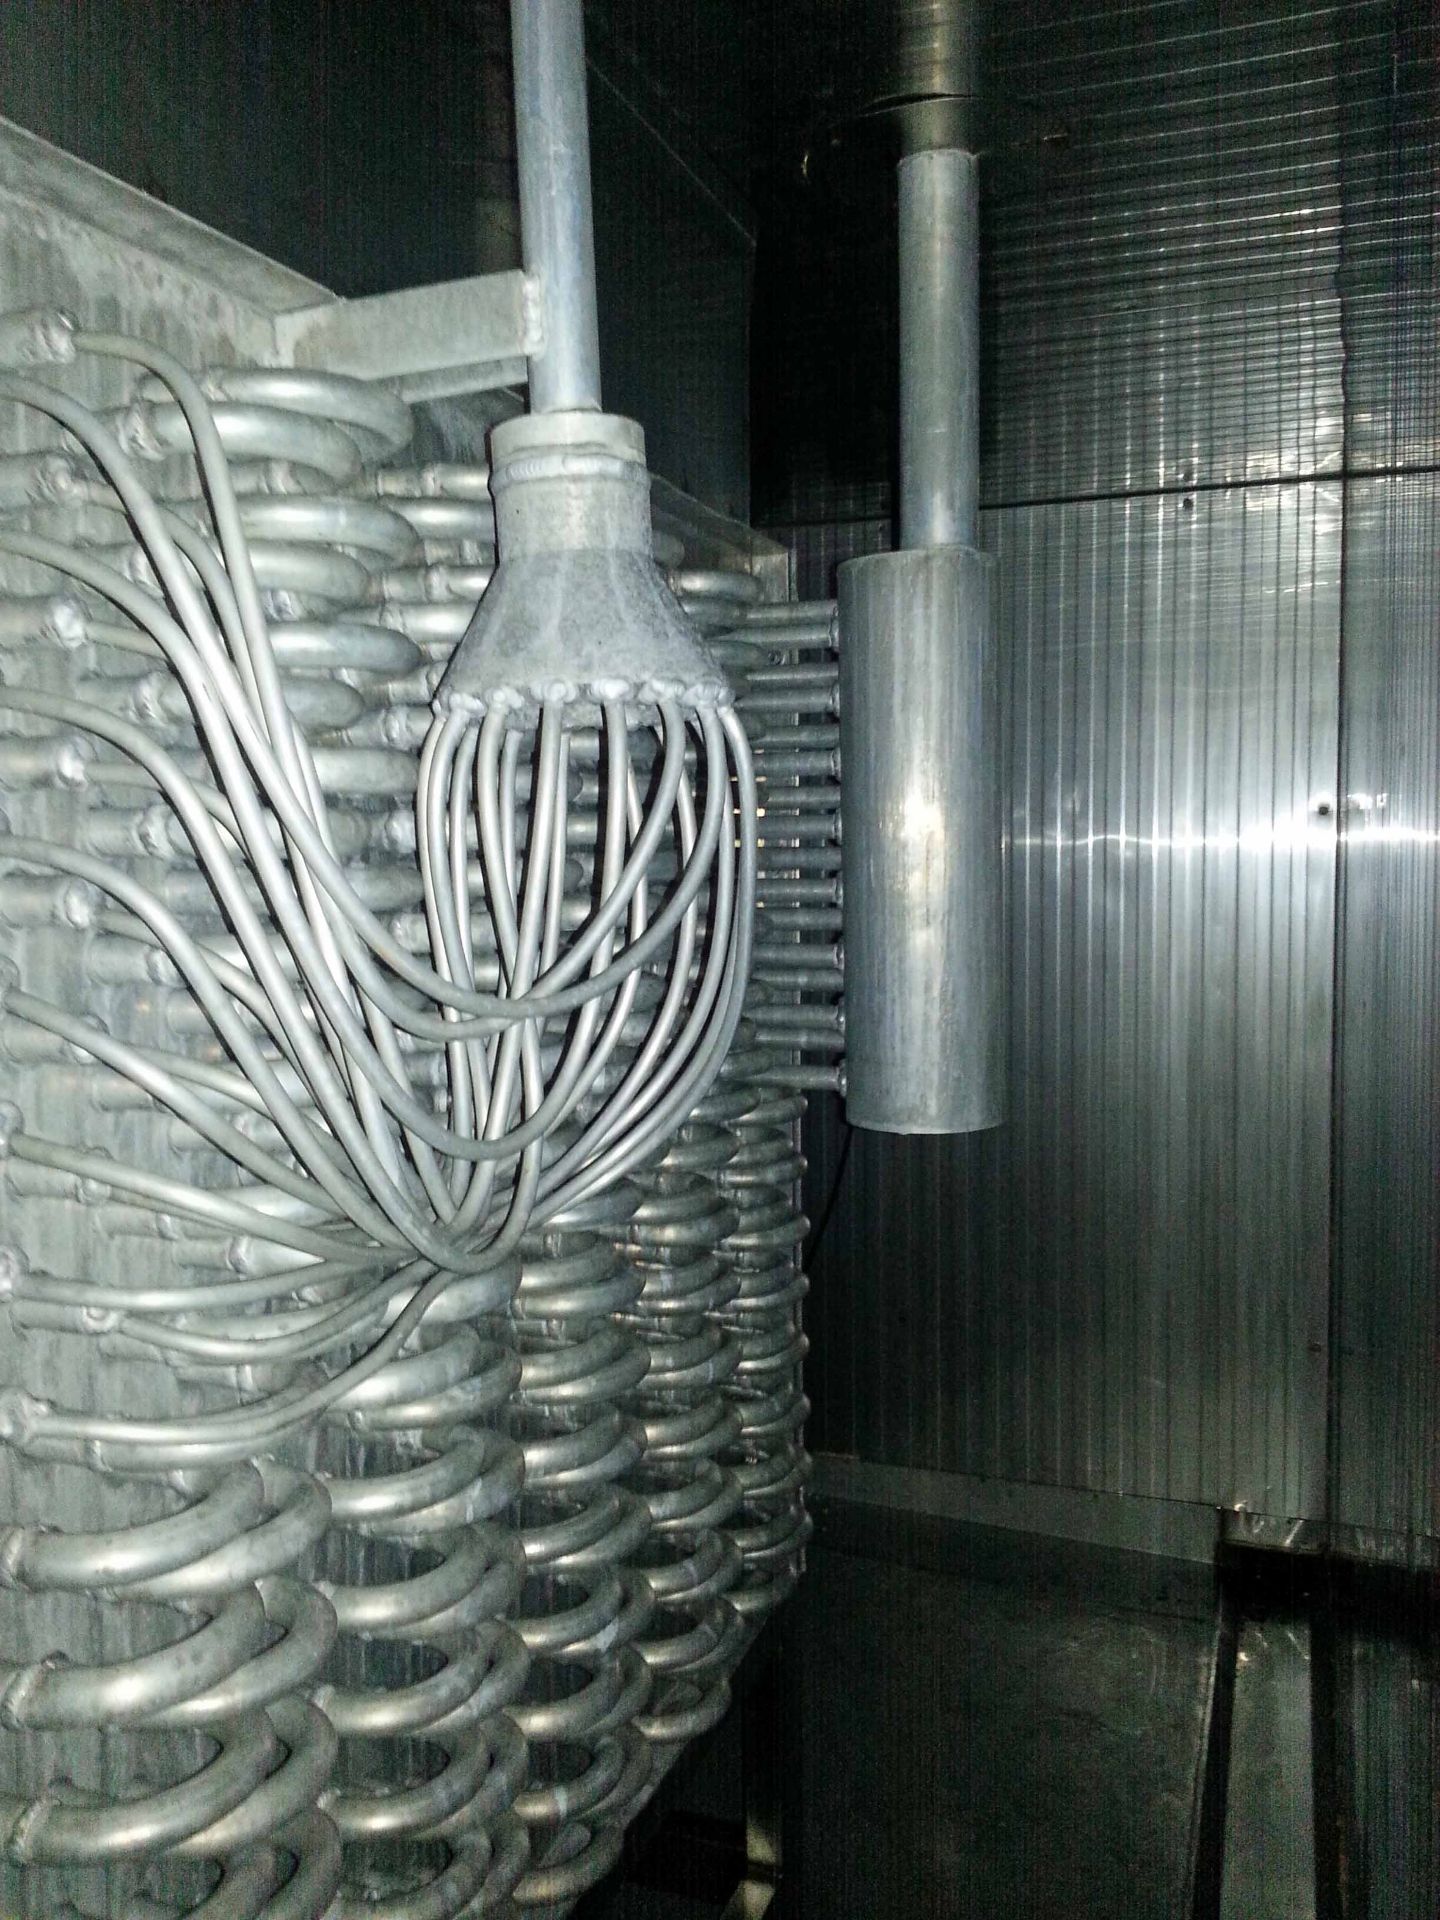 An 8-Tier Continuous Spiral Deep Freezer with Approx. 440mm Wide Through-Feed Stainless Steel Wire - Image 4 of 9